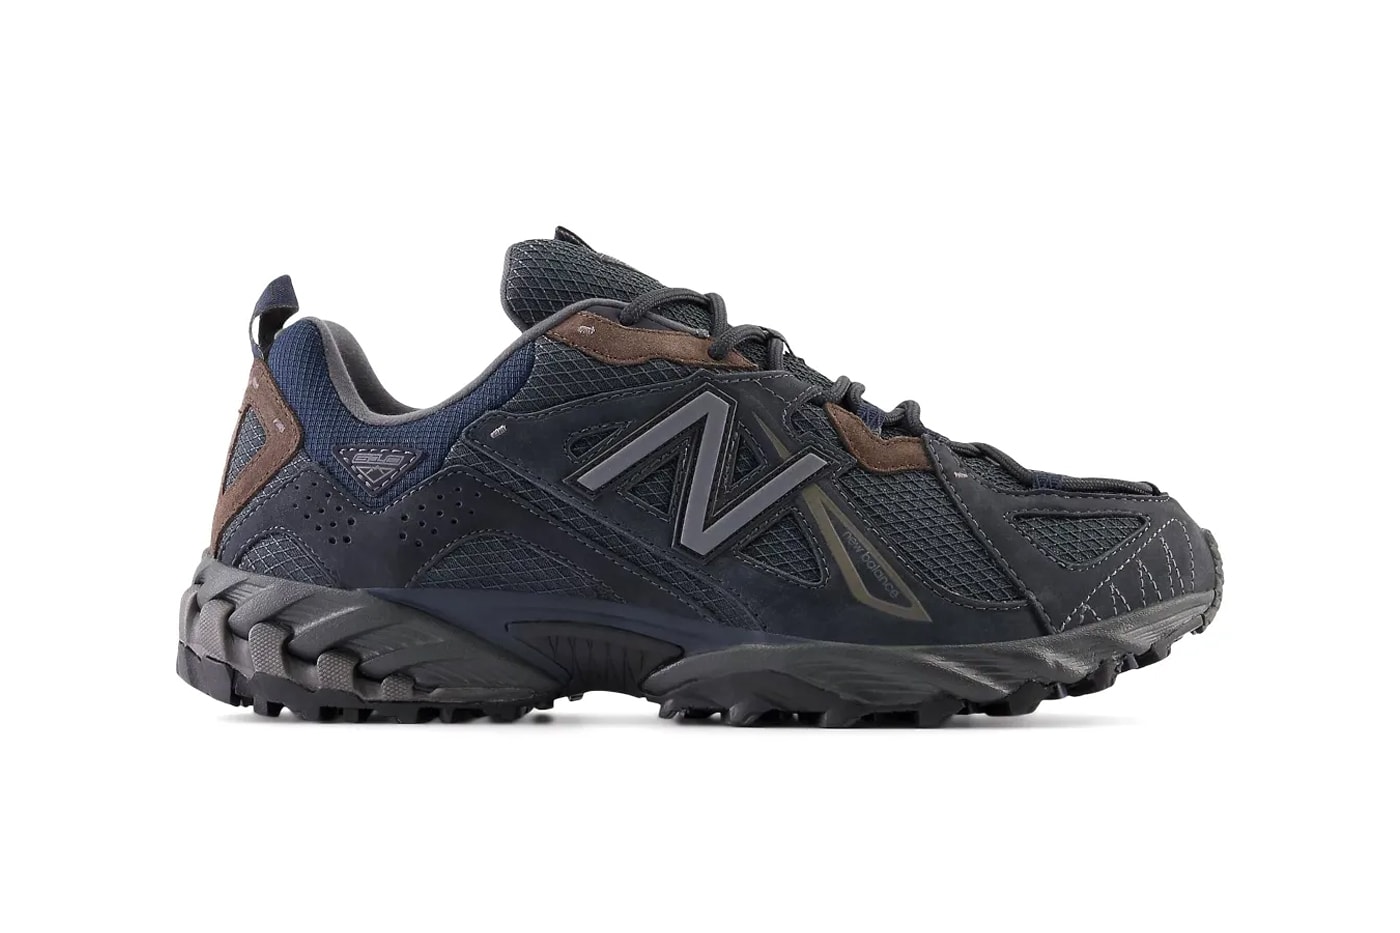 Official Look at the New Balance 610T "Phantom" ml610tp-4 trail running shoe sneaker